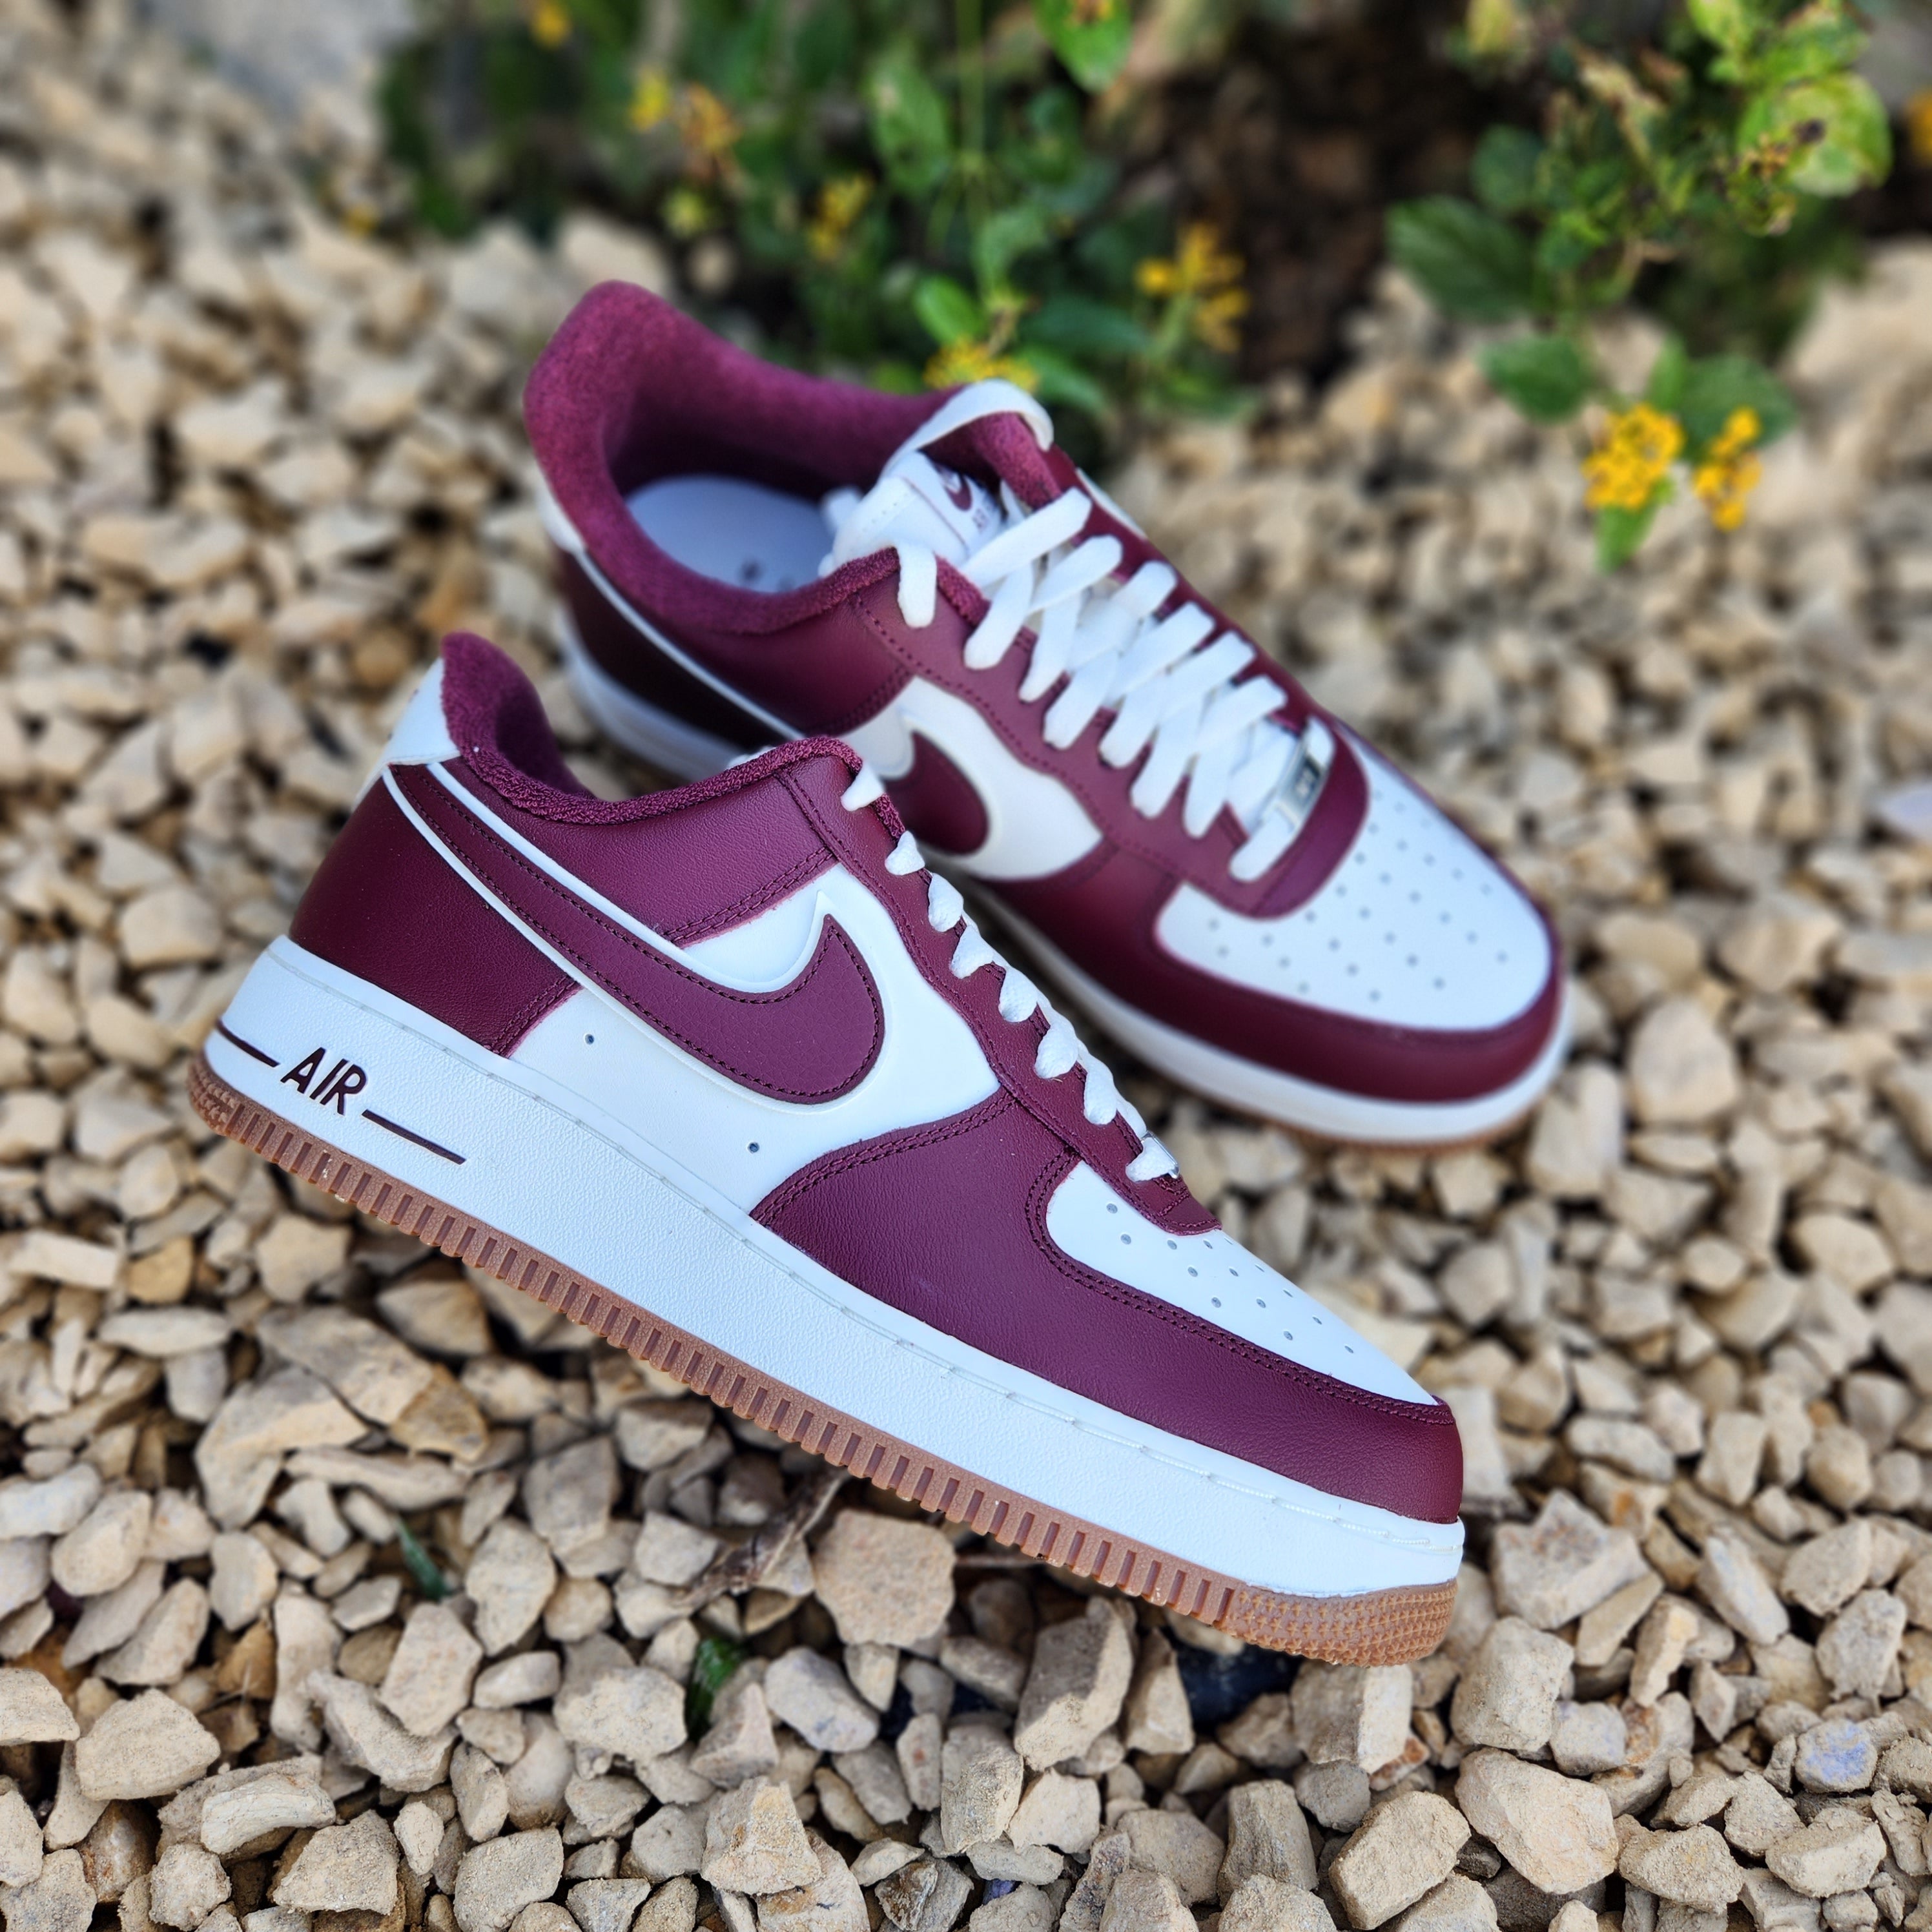 Nike Air Force 1 '07 LV8 'Night Maroon' DQ7659-102 Sail/Night Maroon  $130.00 in mens size 8-13 are available right now in store and online…